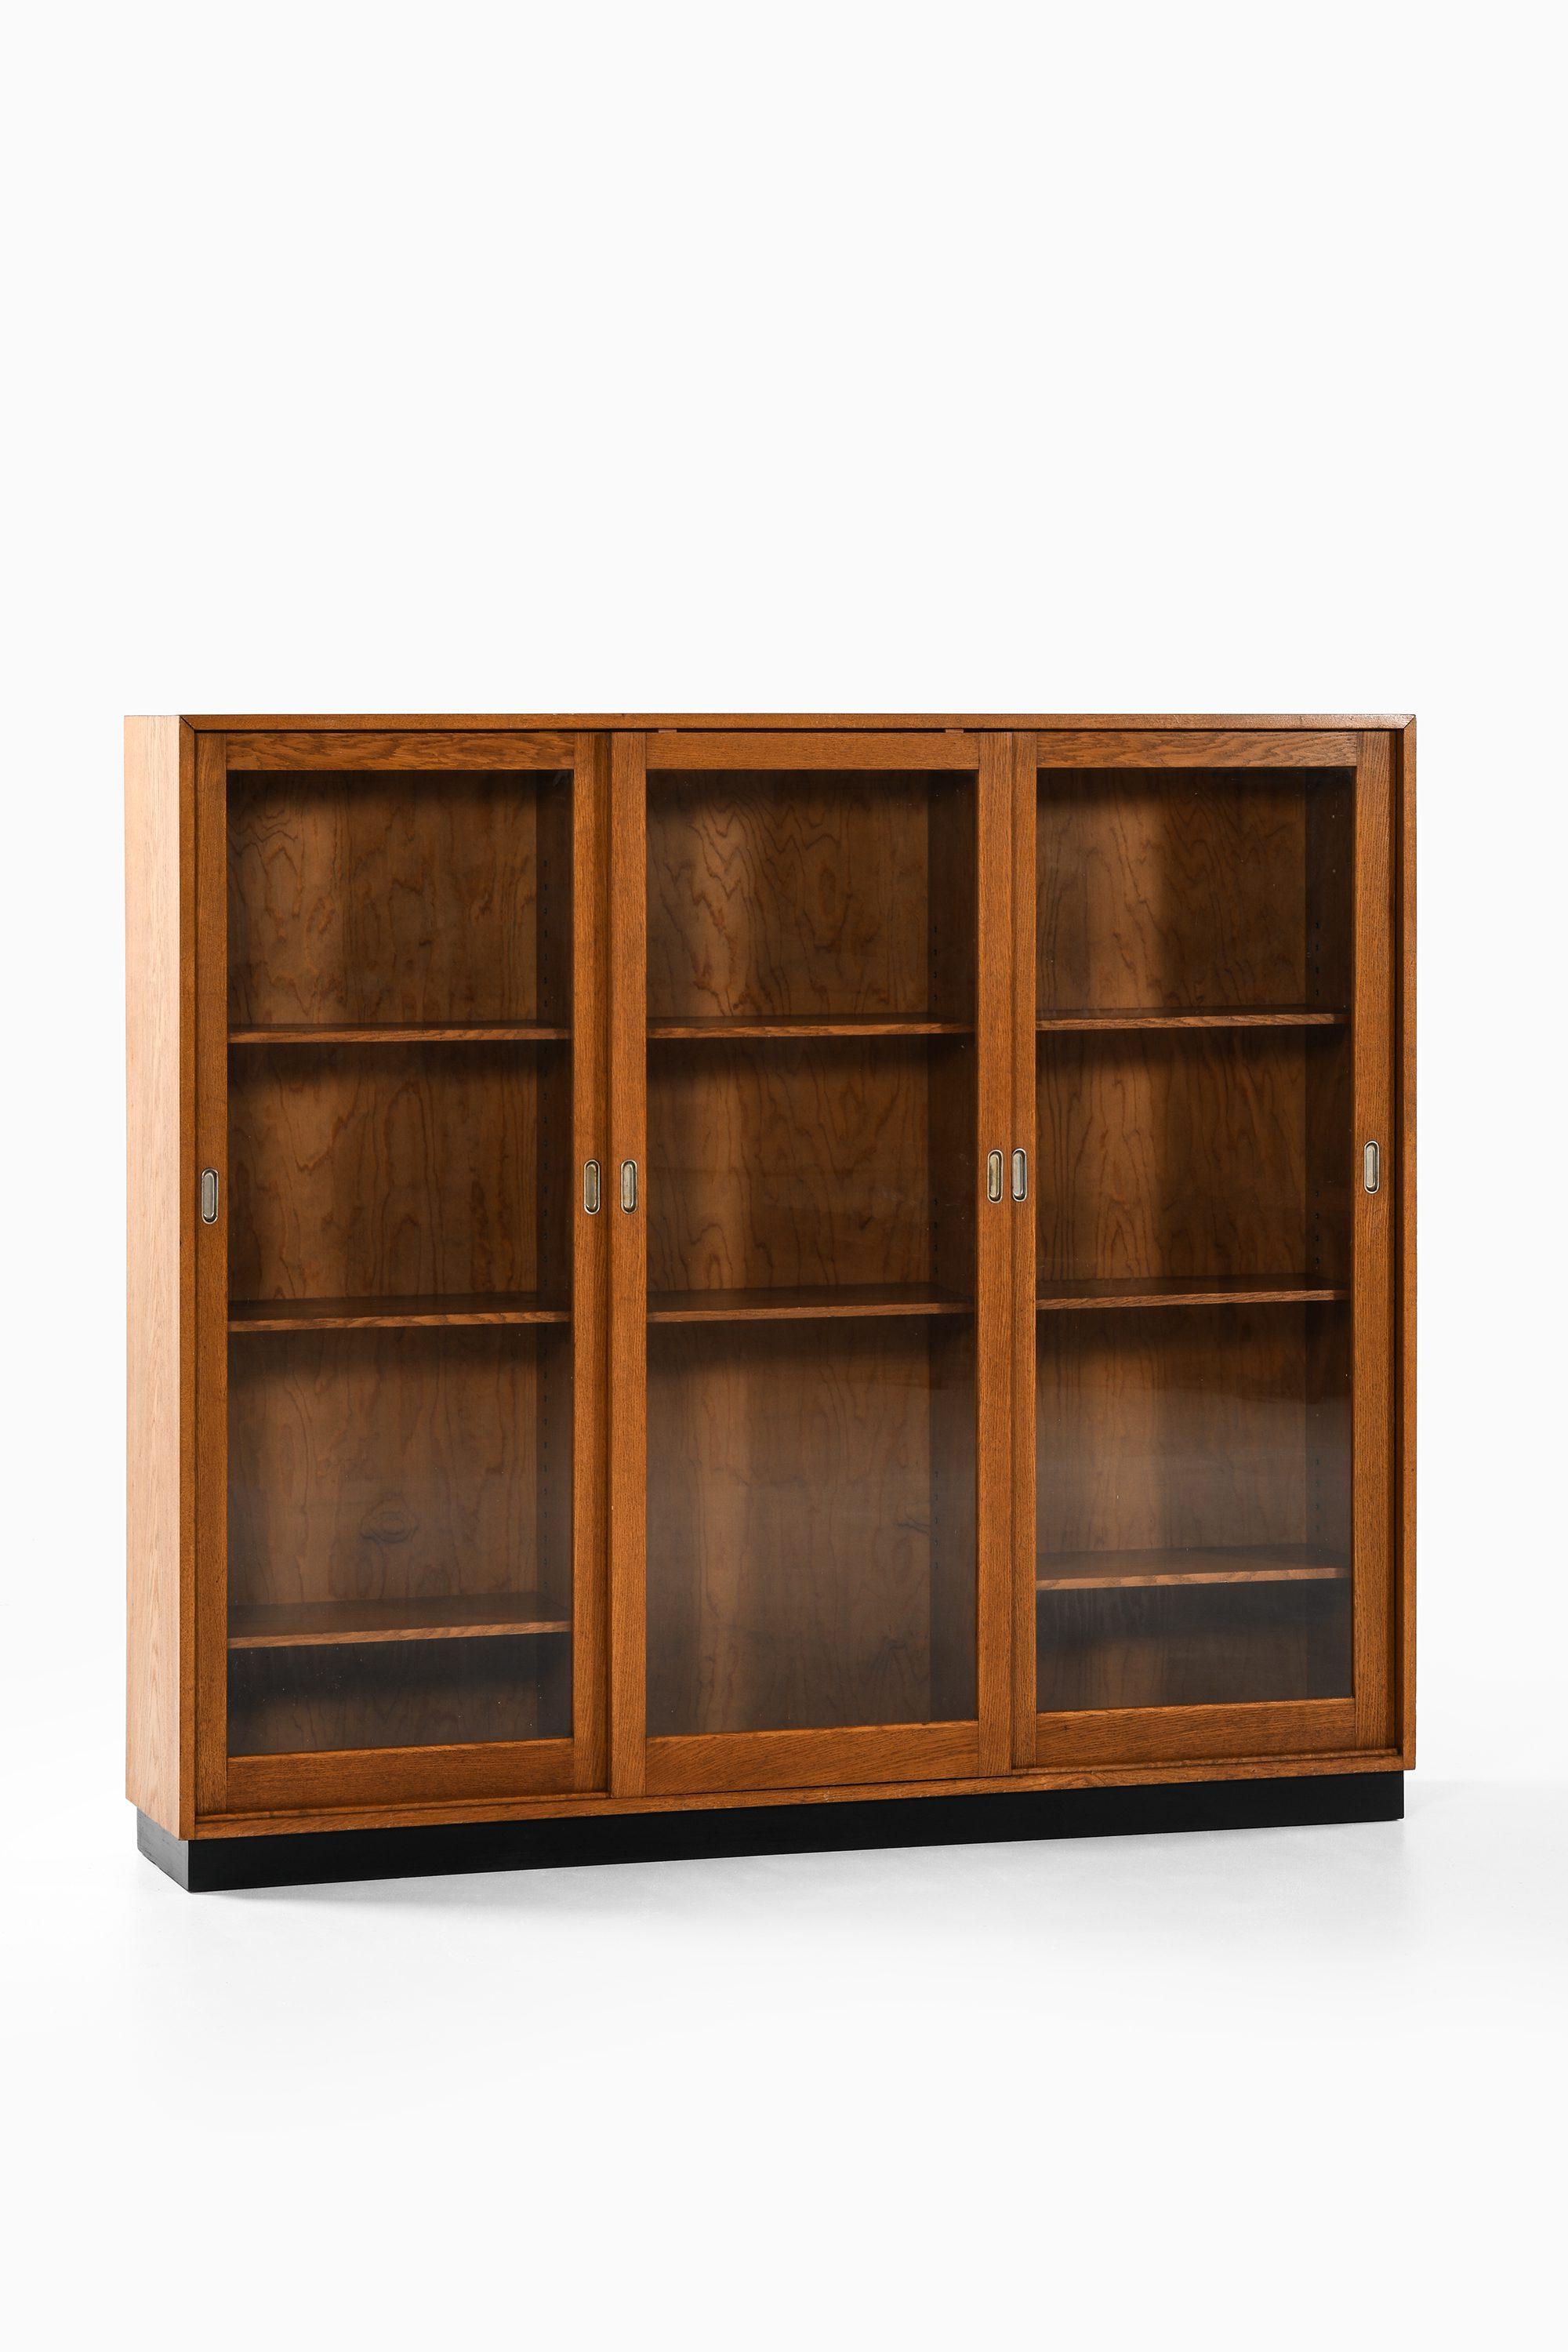 Large Display Cabinet in Oak, Pine and Metal, 1940’s

Additional Information:
Material: Oak, pine and metal
Style: Mid century, Scandinavia
Produced in Sweden
Dimensions (W x D x H): 180 x 36 x 158 cm
Condition: Good vintage condition, with signs of